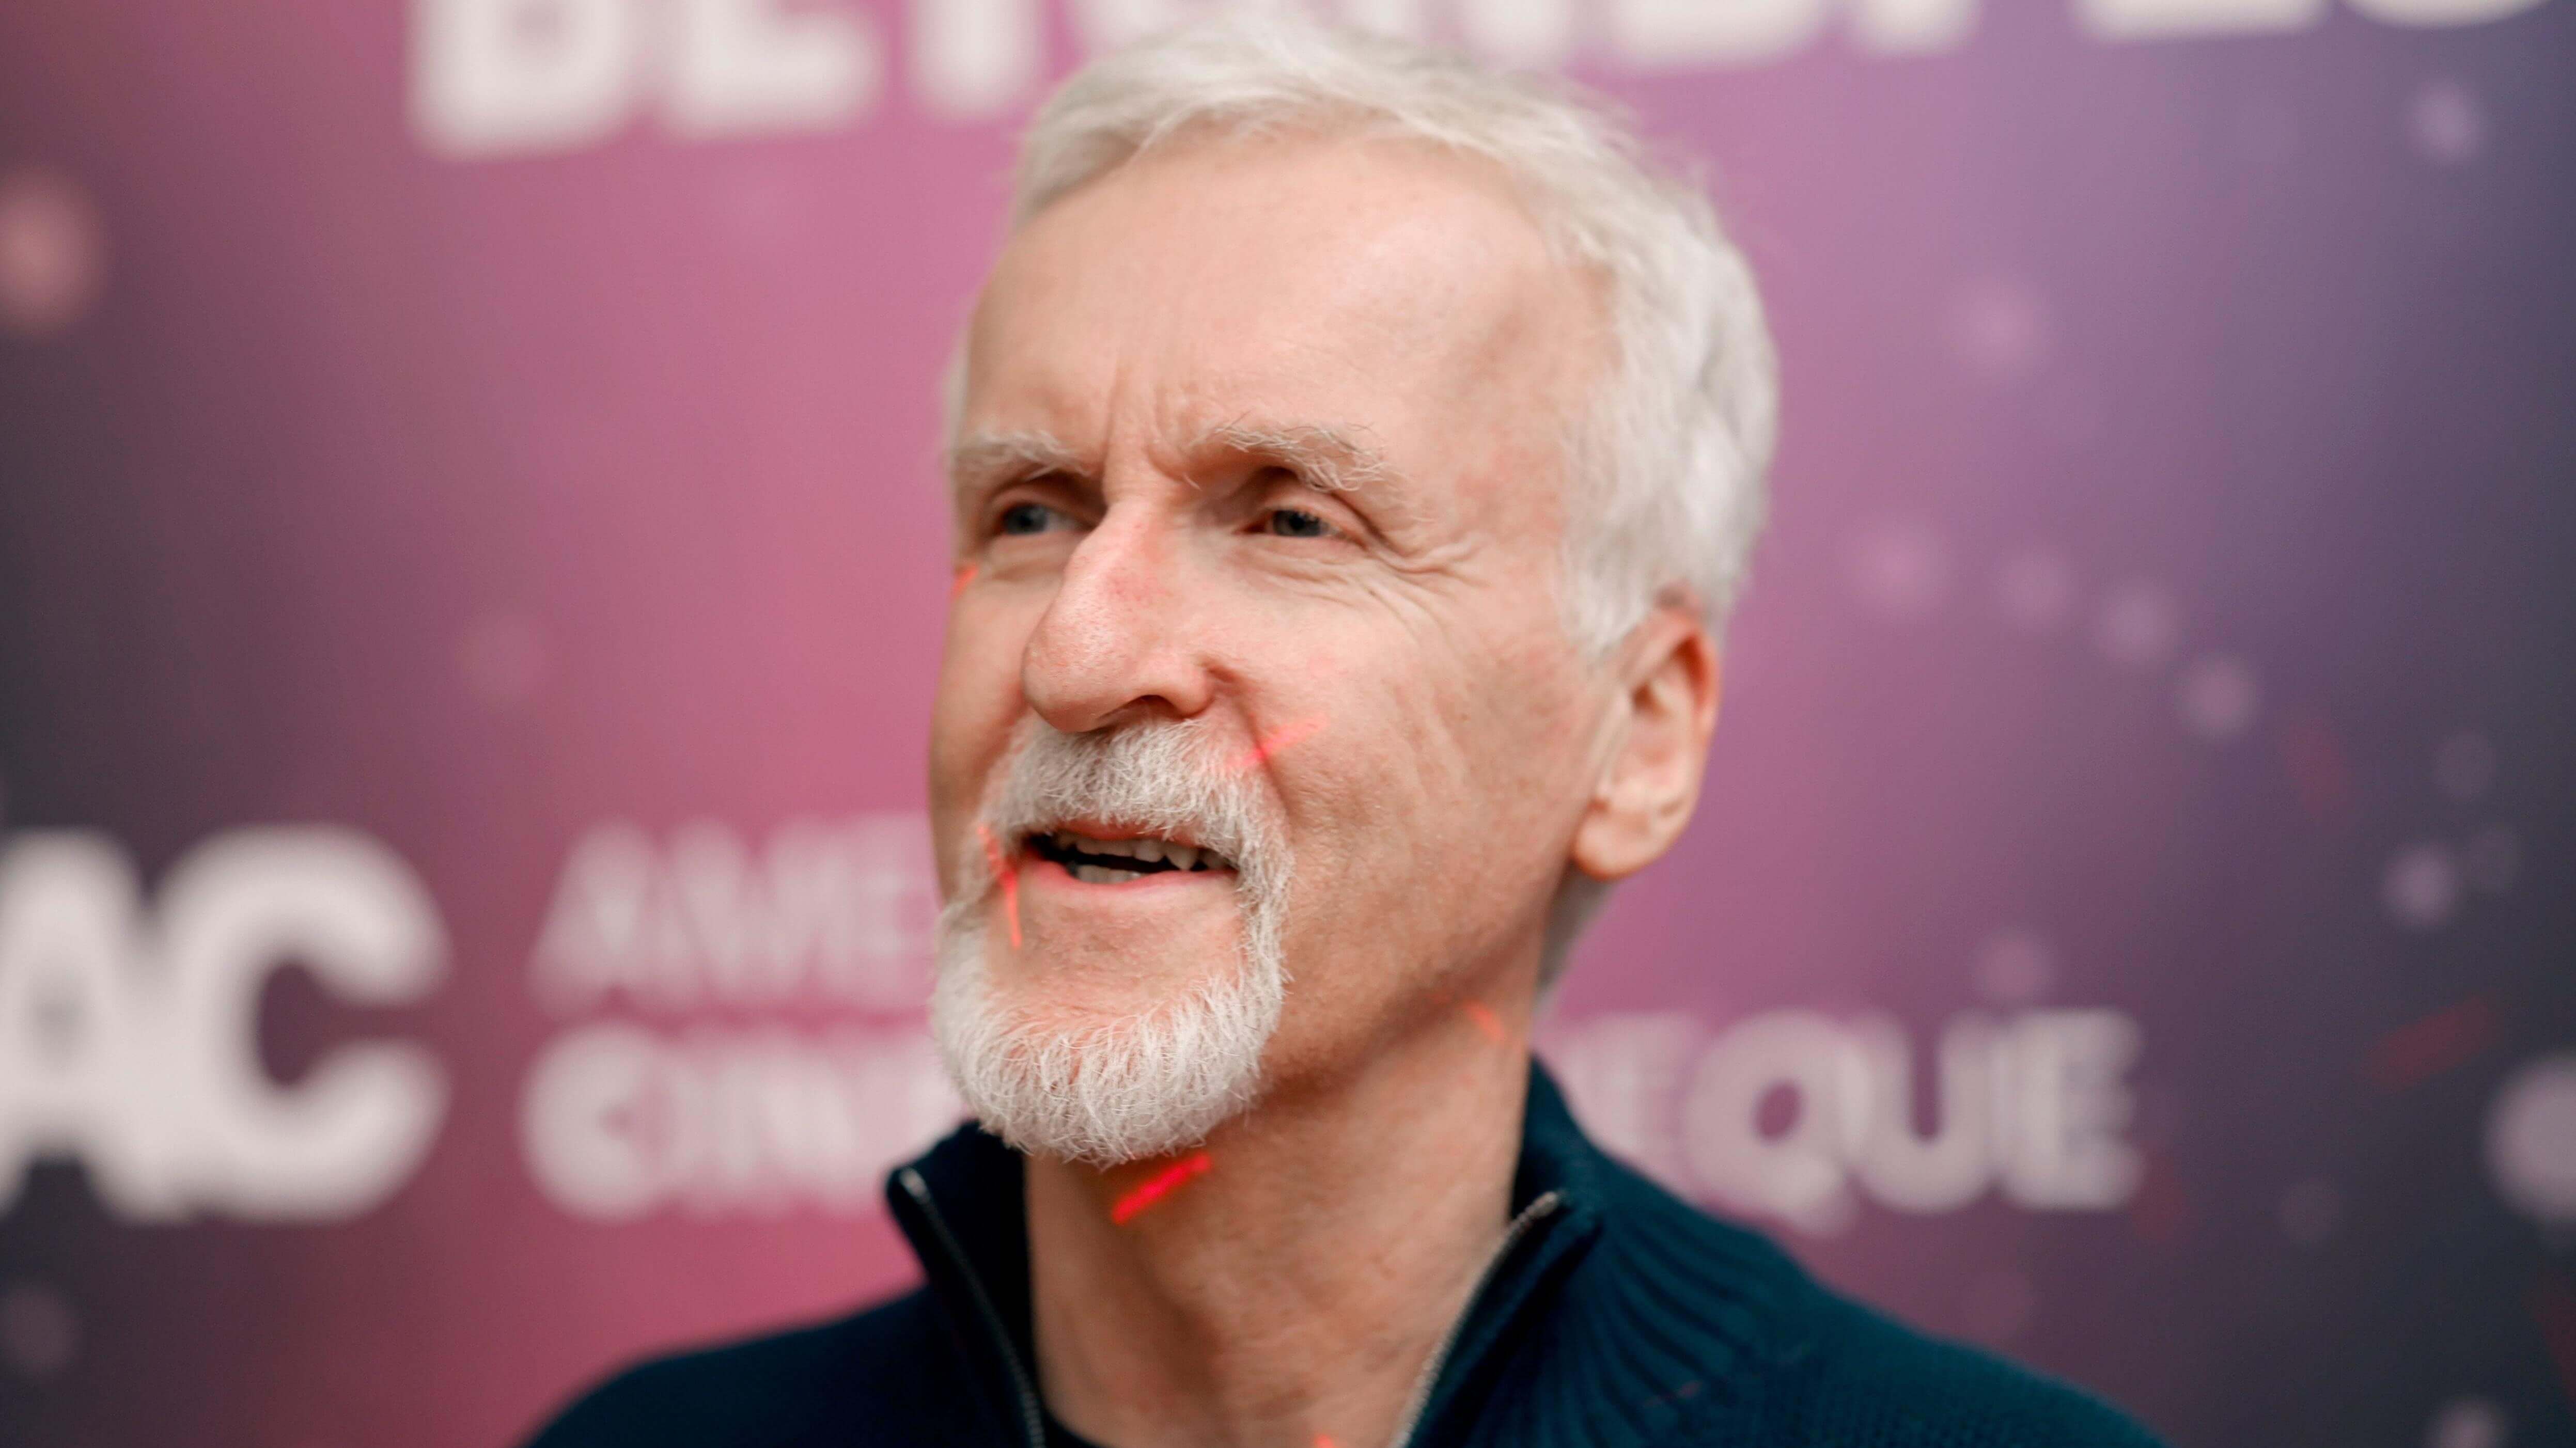 James Cameron says he cast short extras to save money on Titanic